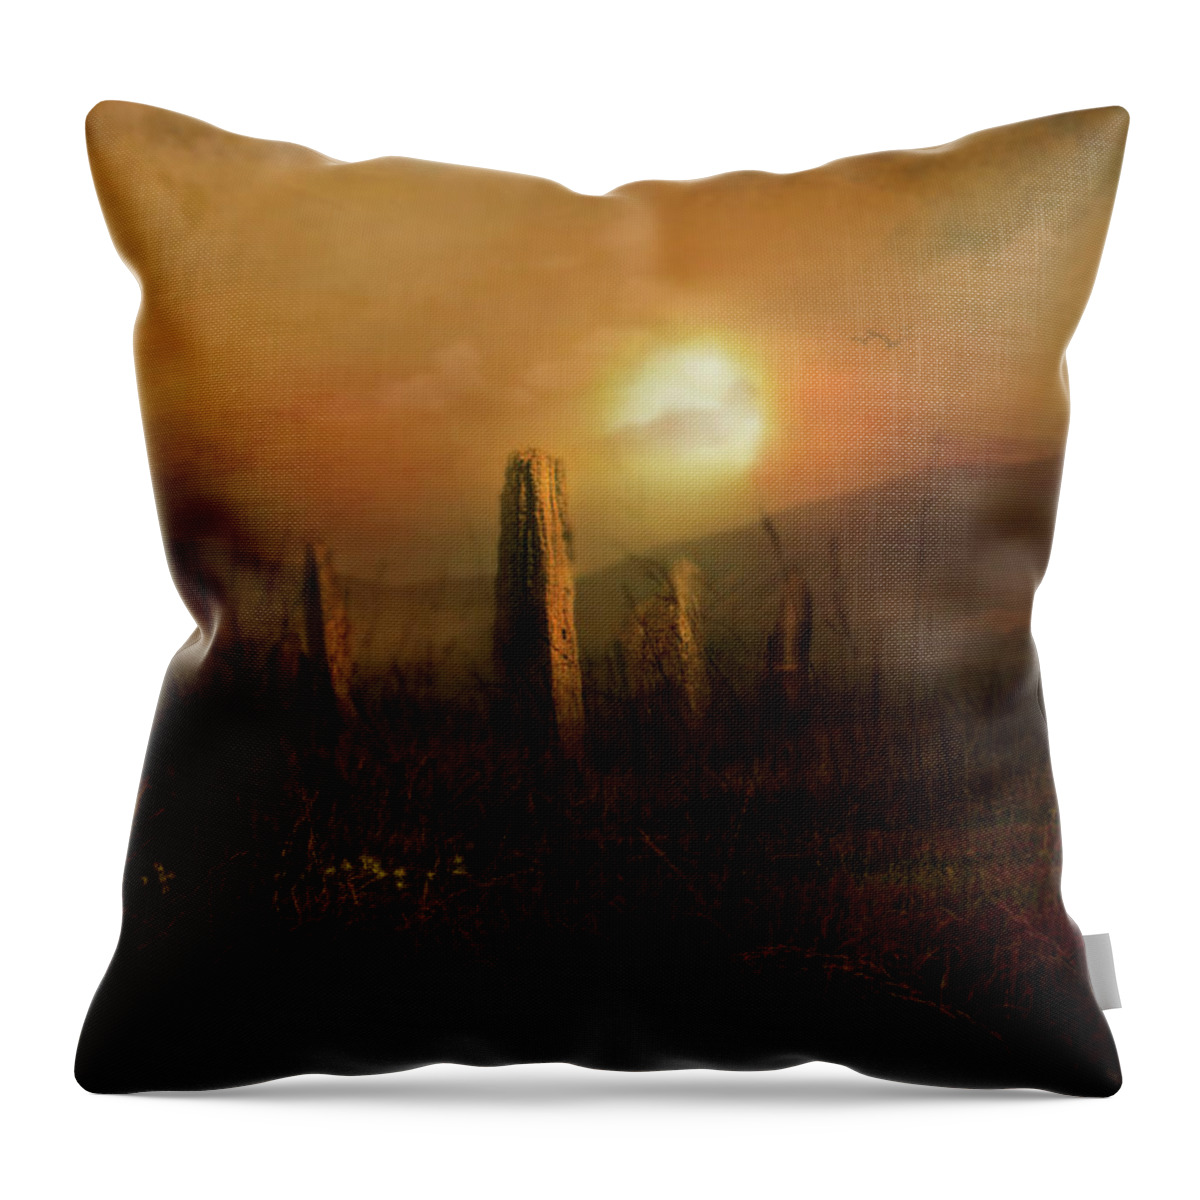  Throw Pillow featuring the photograph On Machrie Moor by Cybele Moon